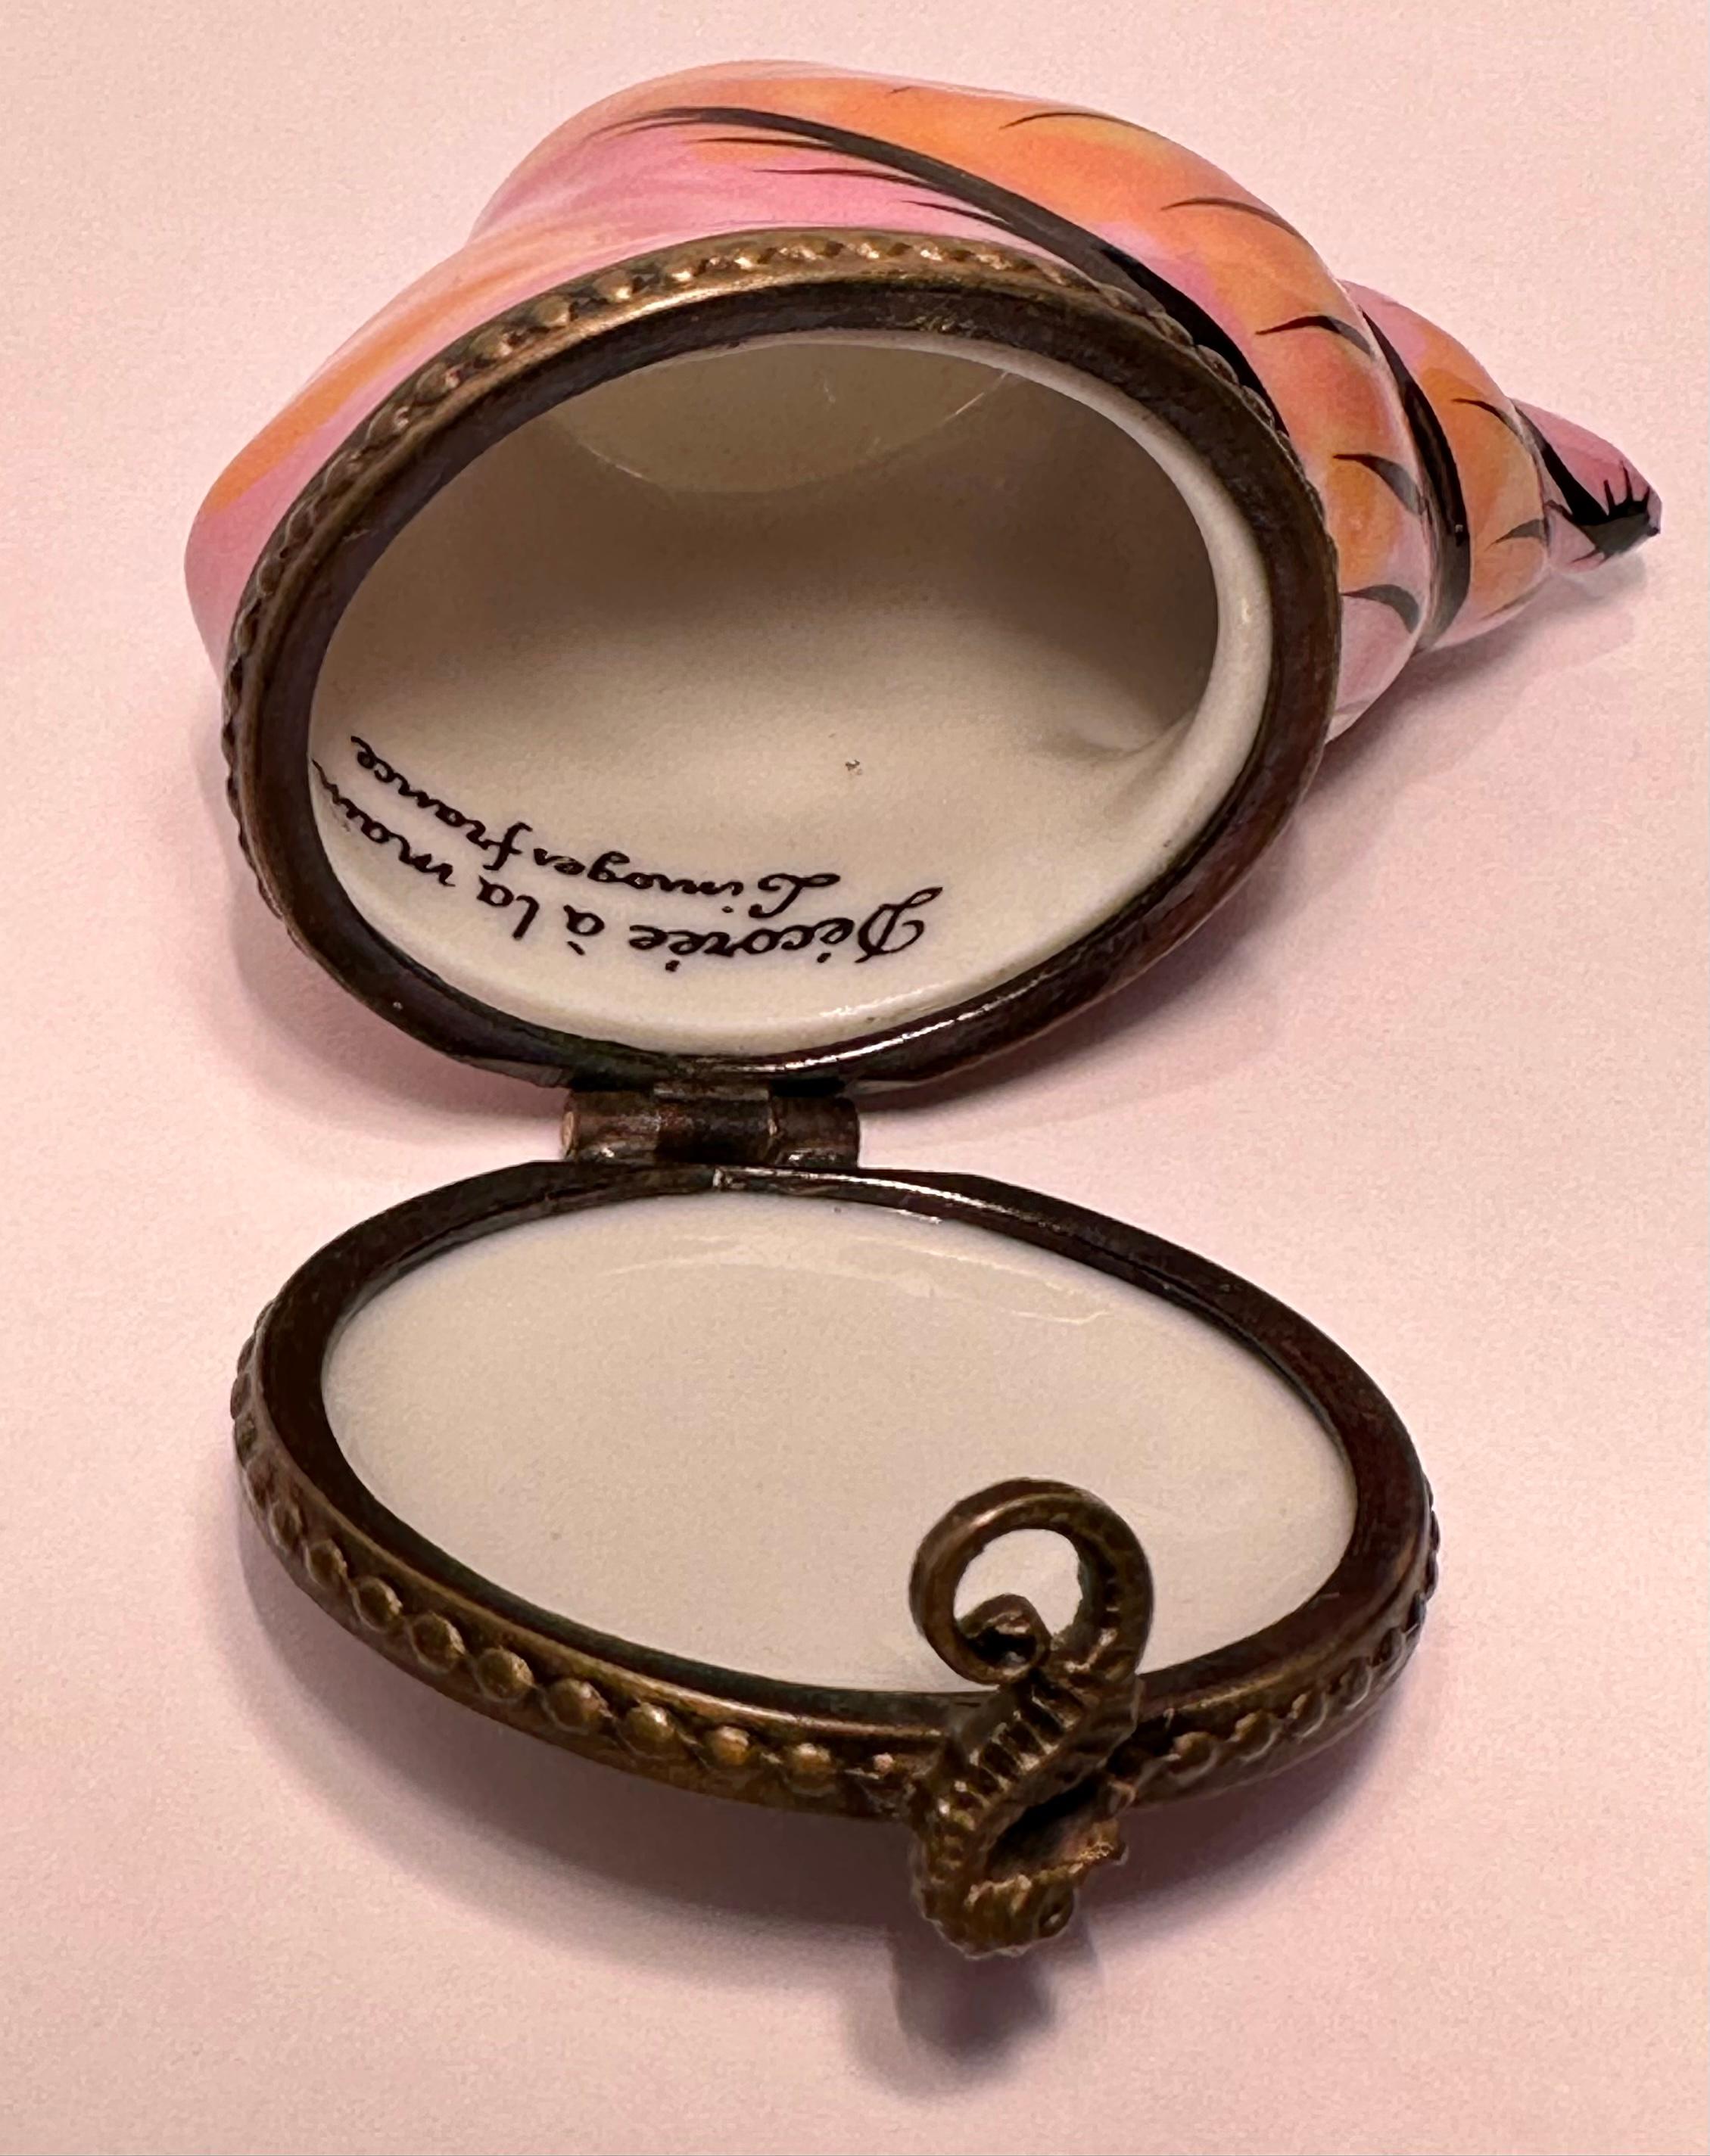 Unique Limoges France Hand Painted Pink Sea Shell Porcelain Trinket Box In Excellent Condition For Sale In Tustin, CA